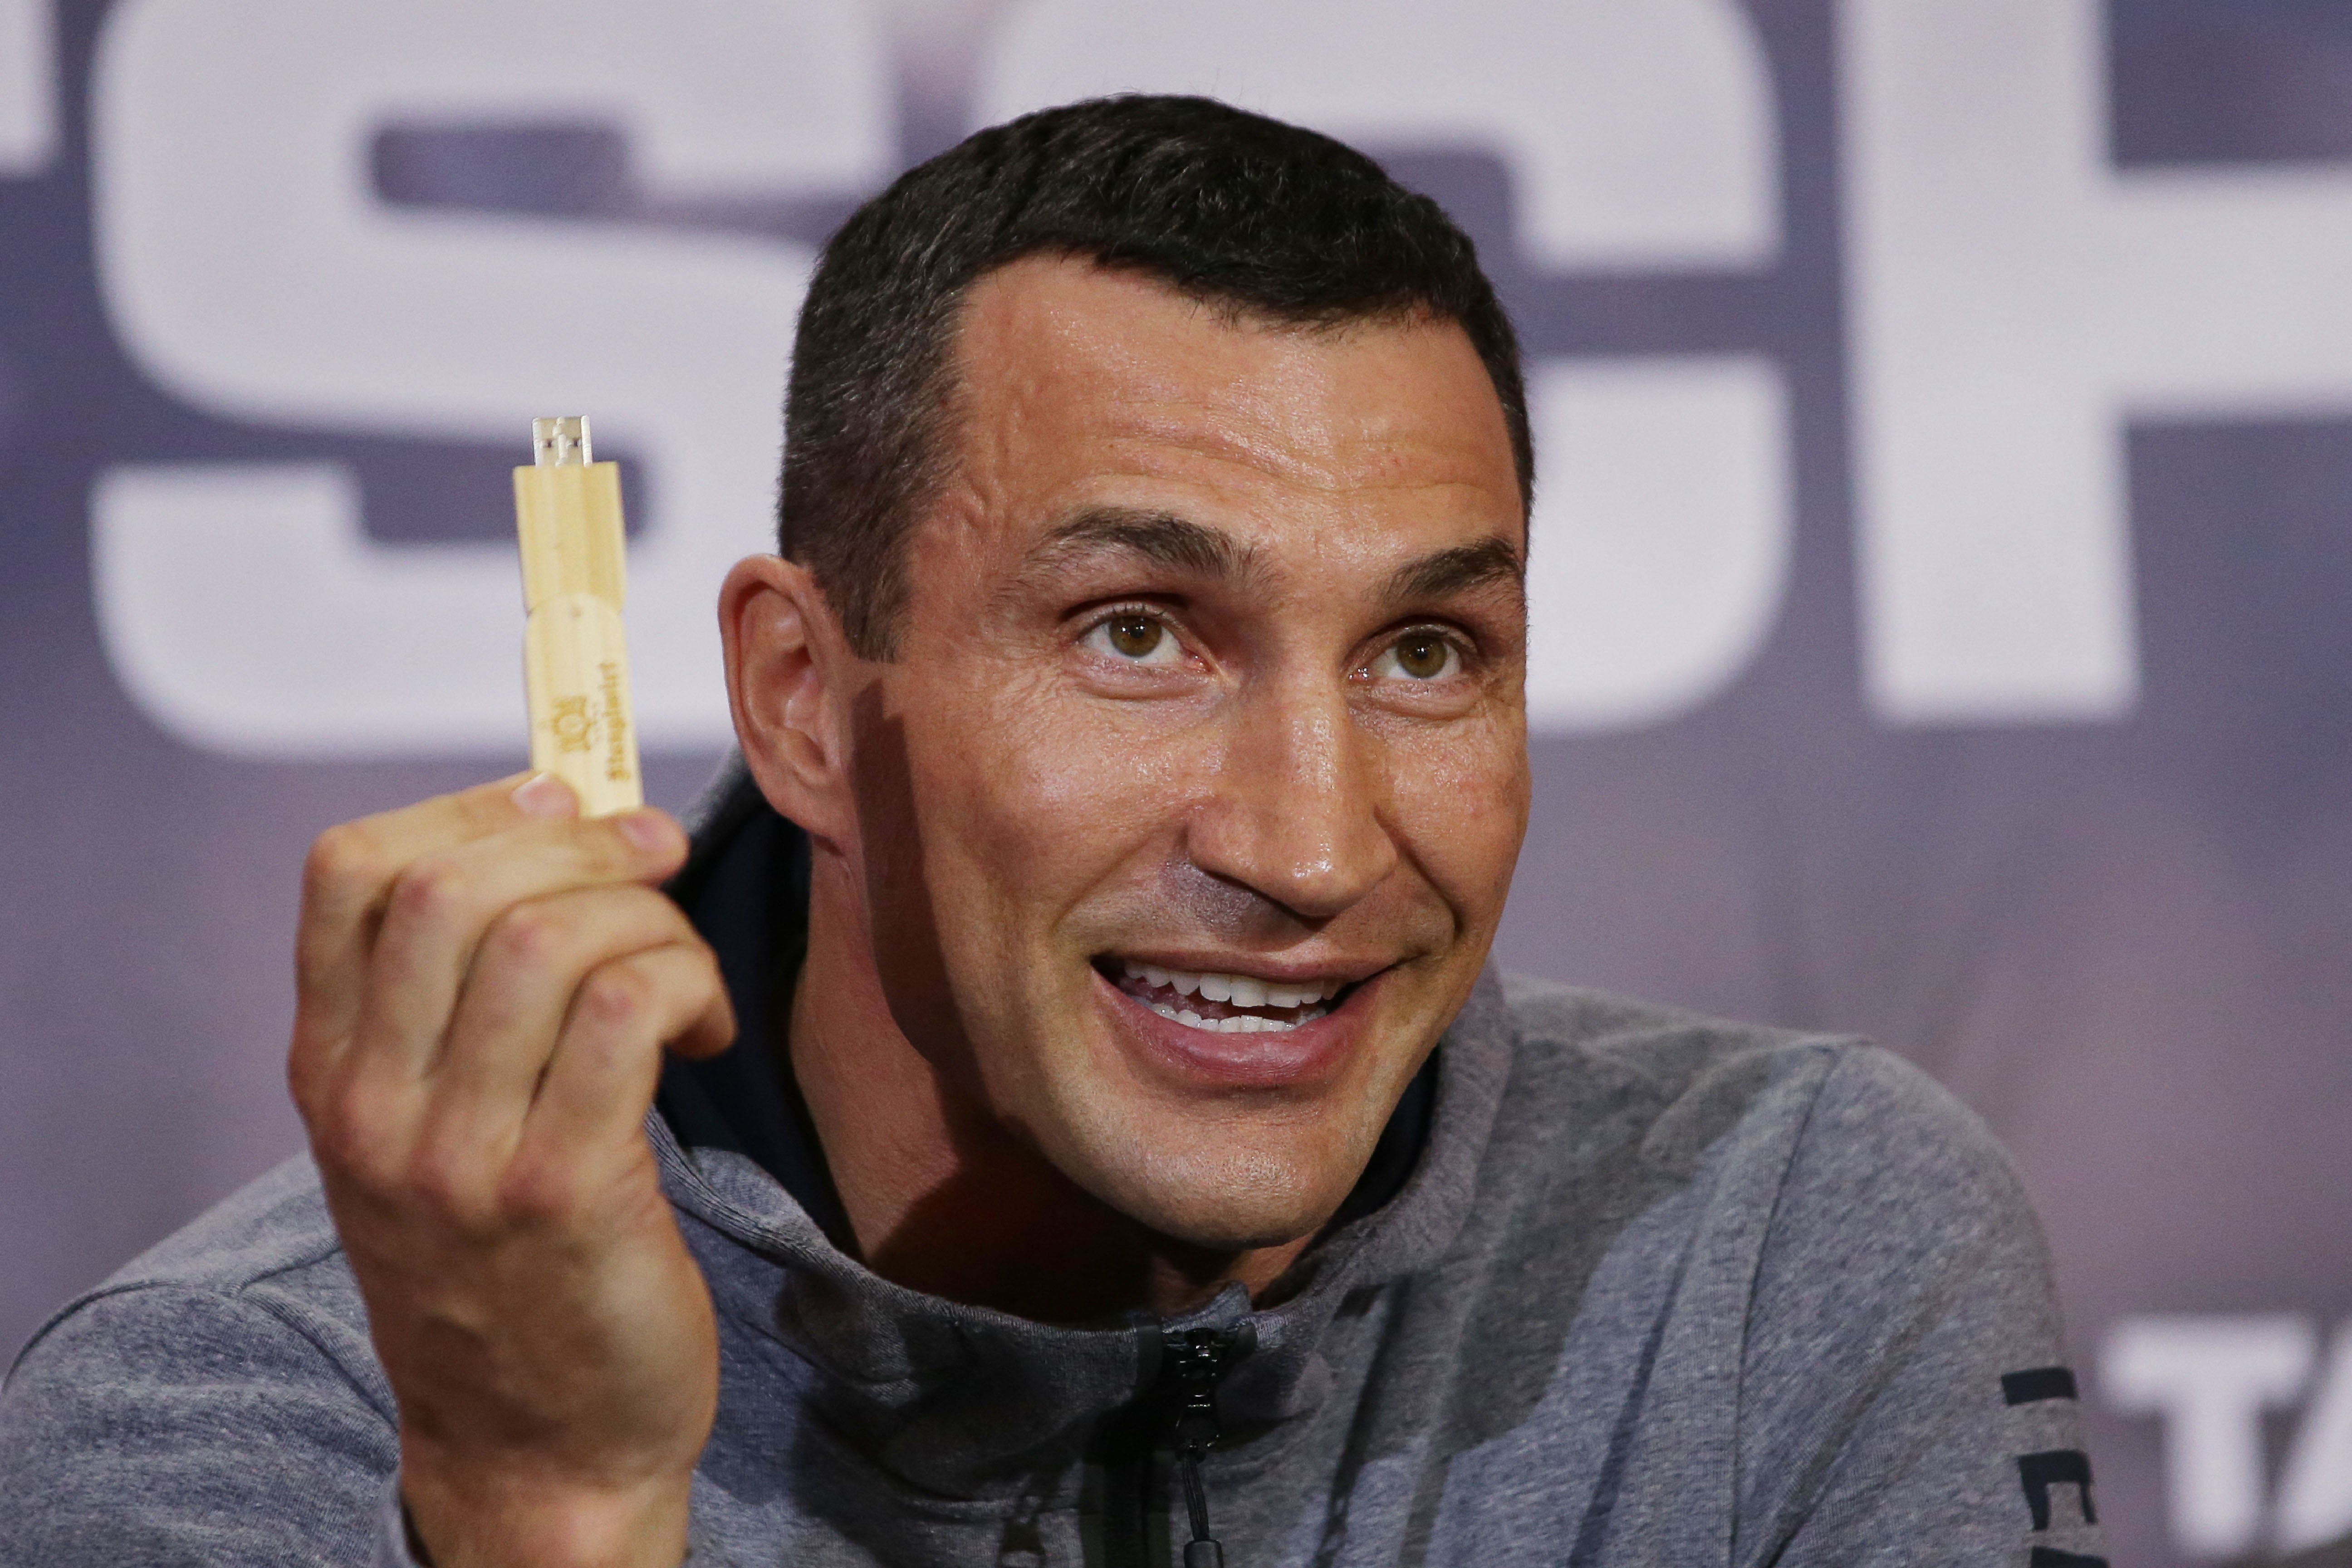 Wladimir Klitschko declared that he had stored the details of how to beat Anthony Joshua on a USB stick